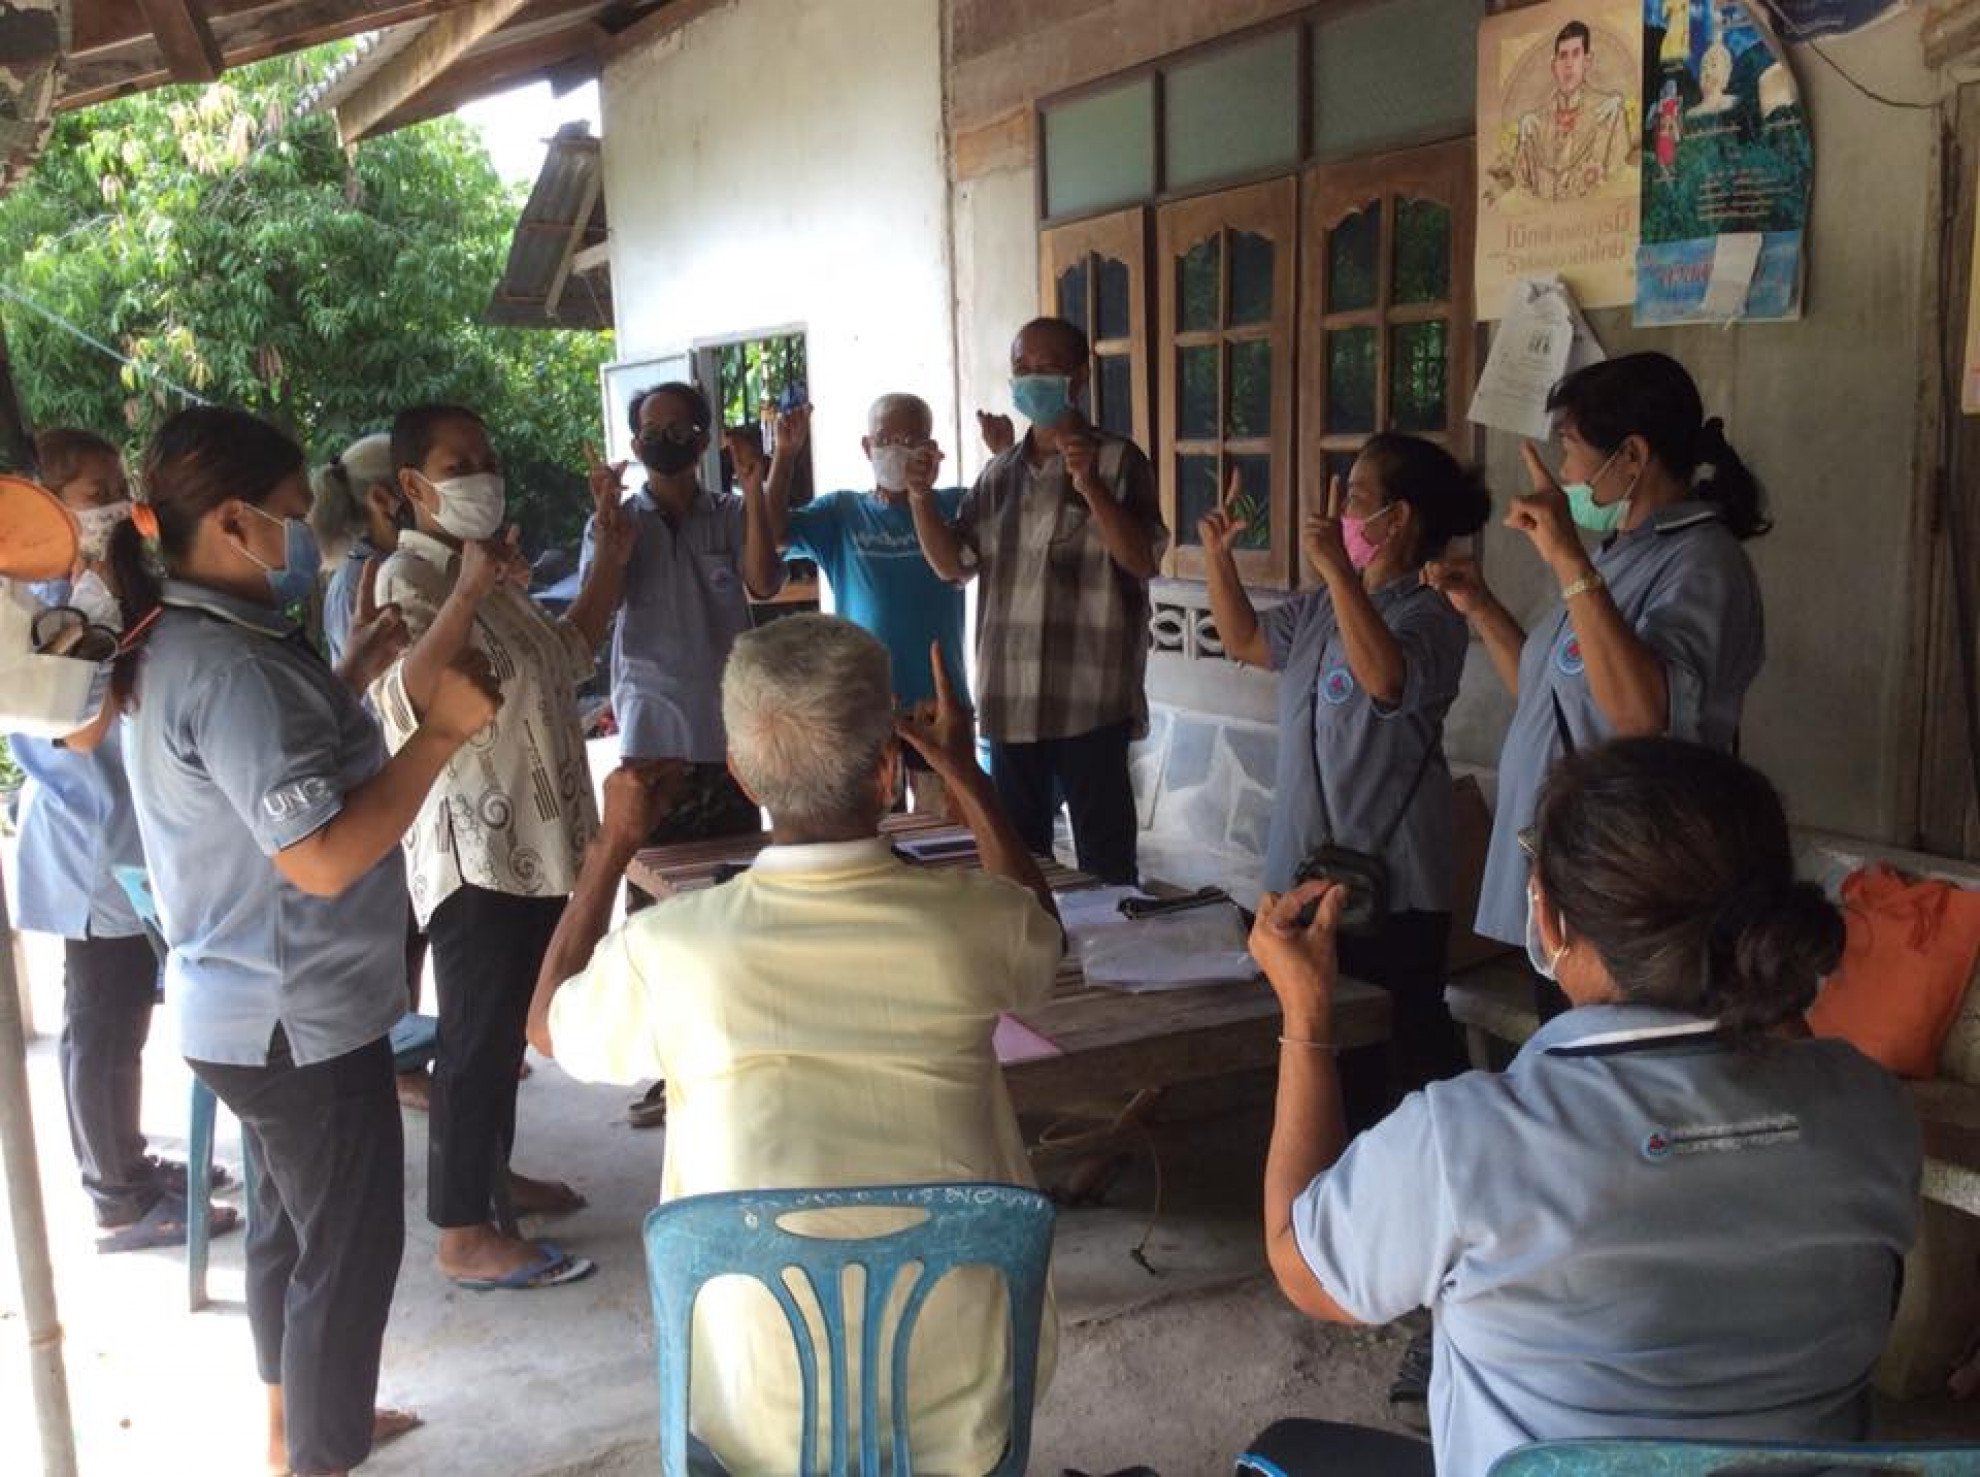 brain exercise training for the elderly people in the community